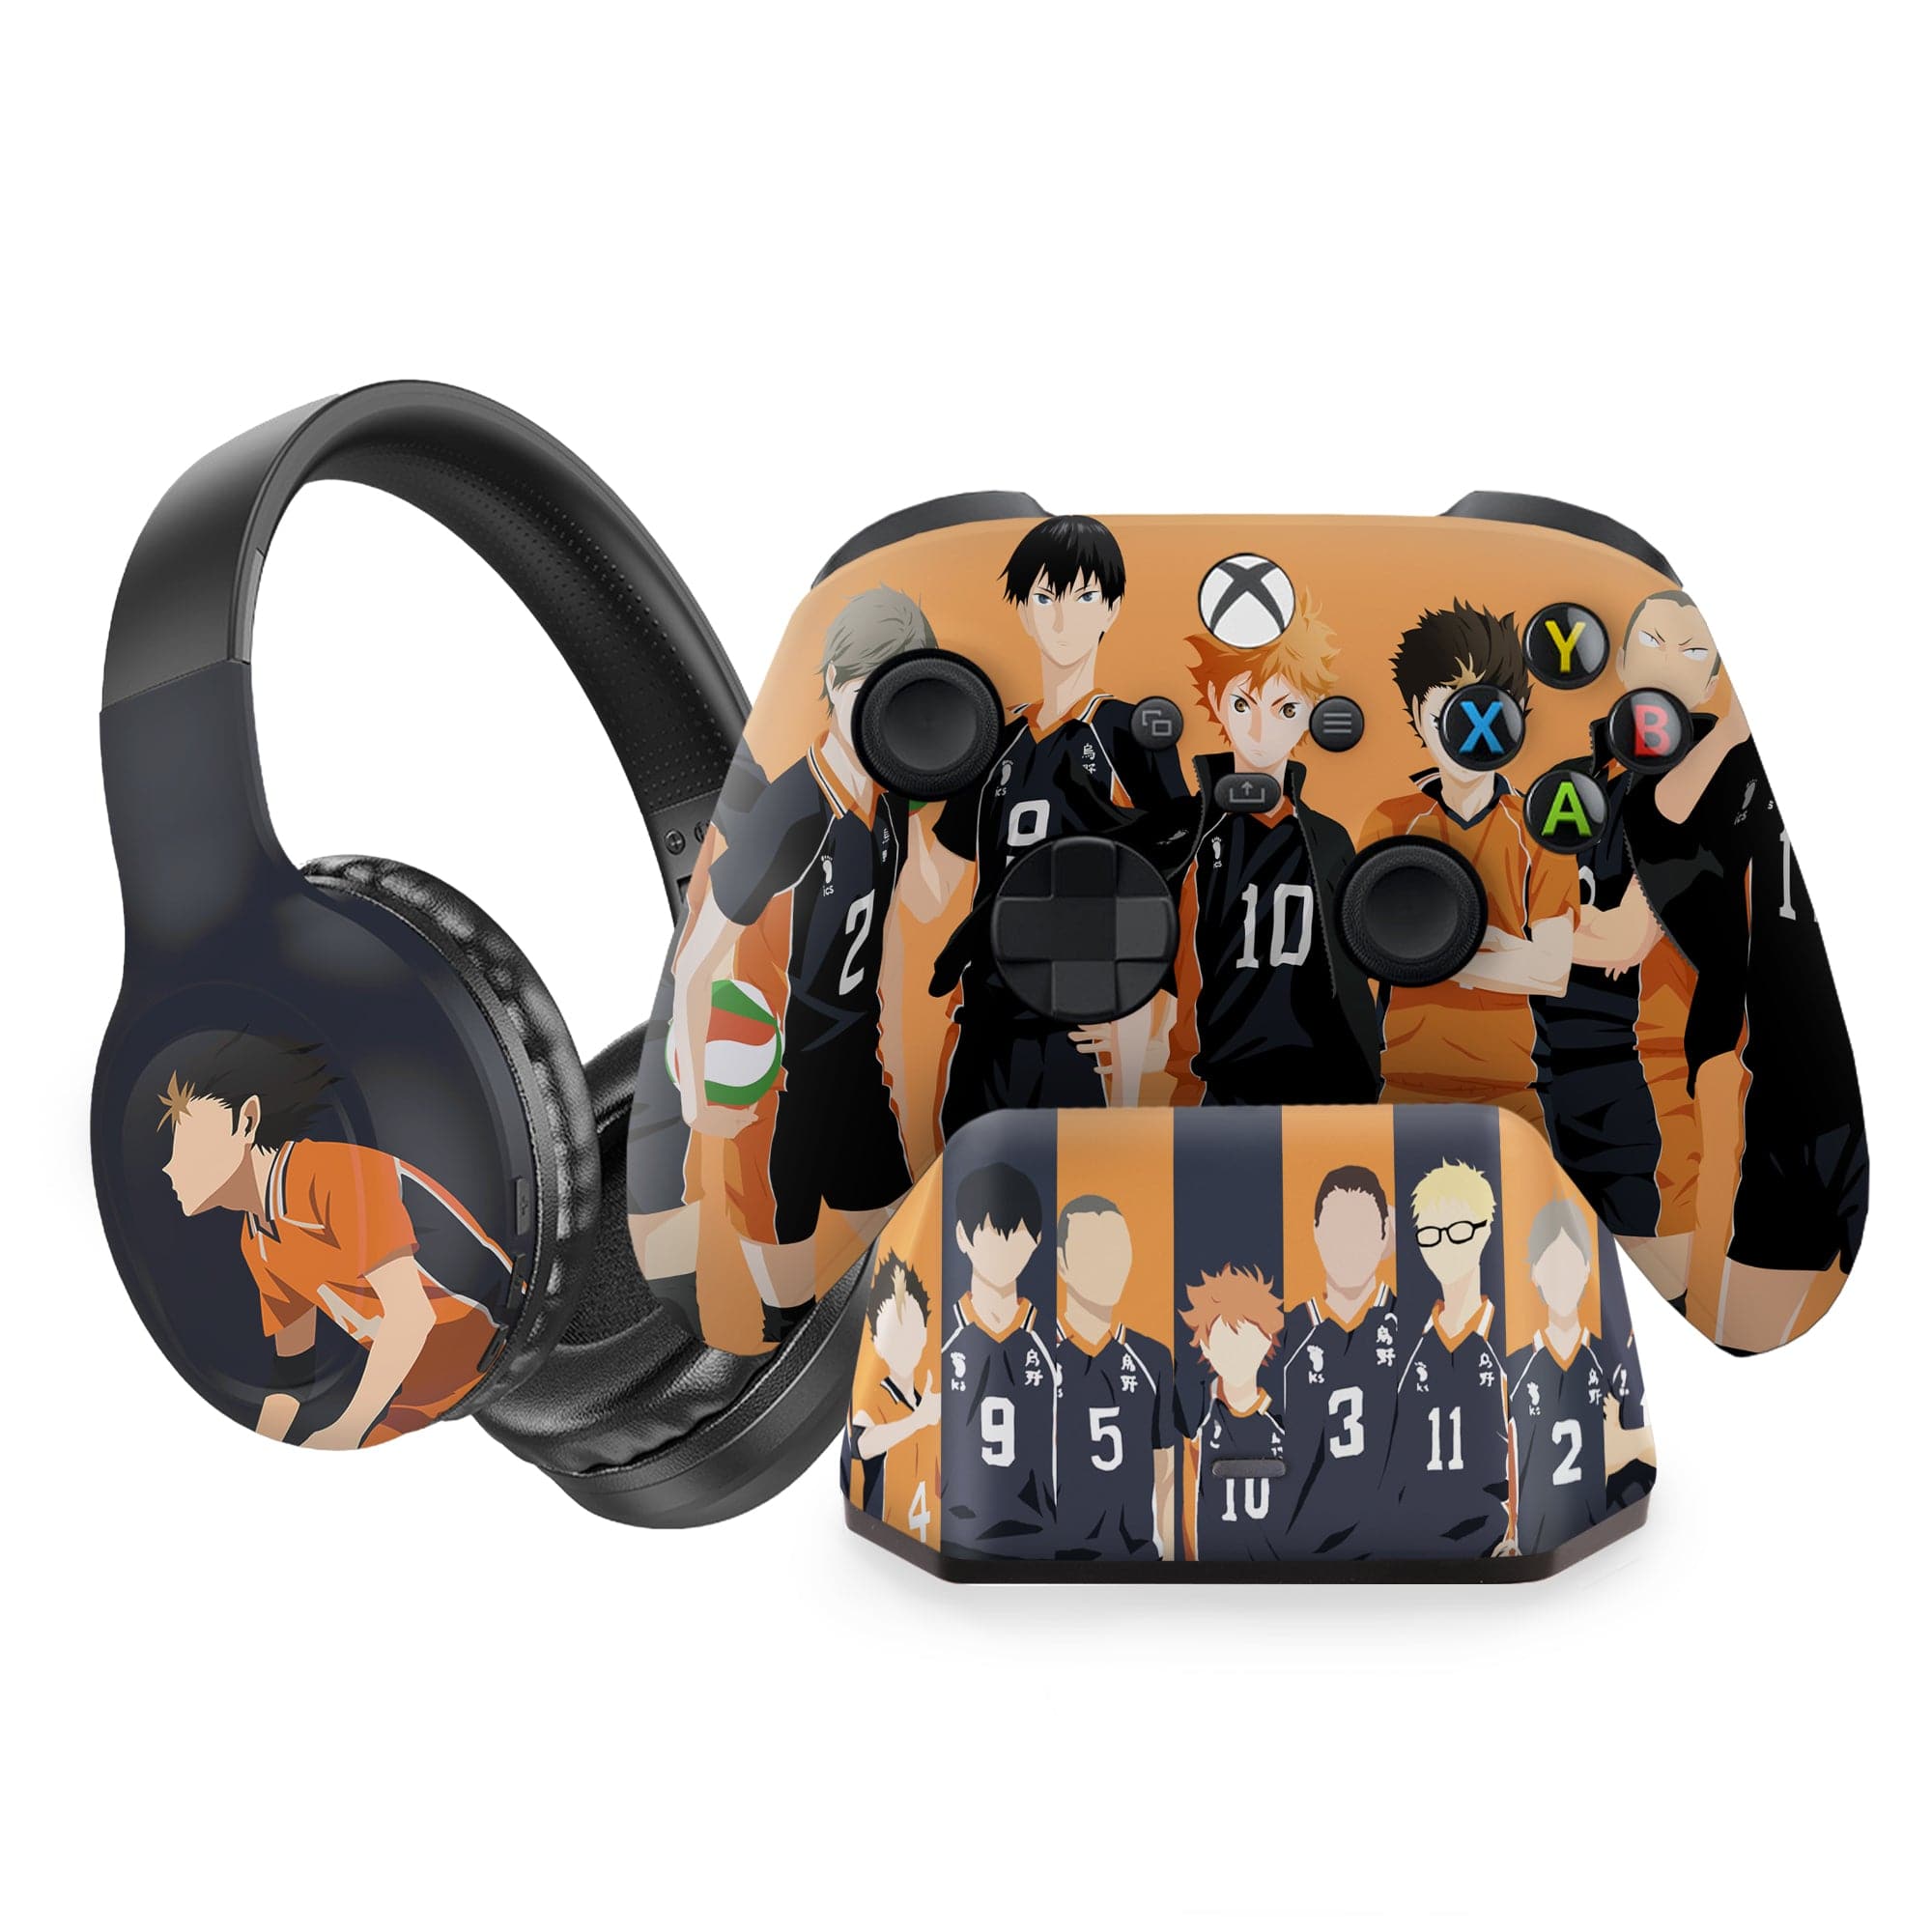 Haikyuu inspired Xbox Series X Modded Controller with Charging Station & Headphone